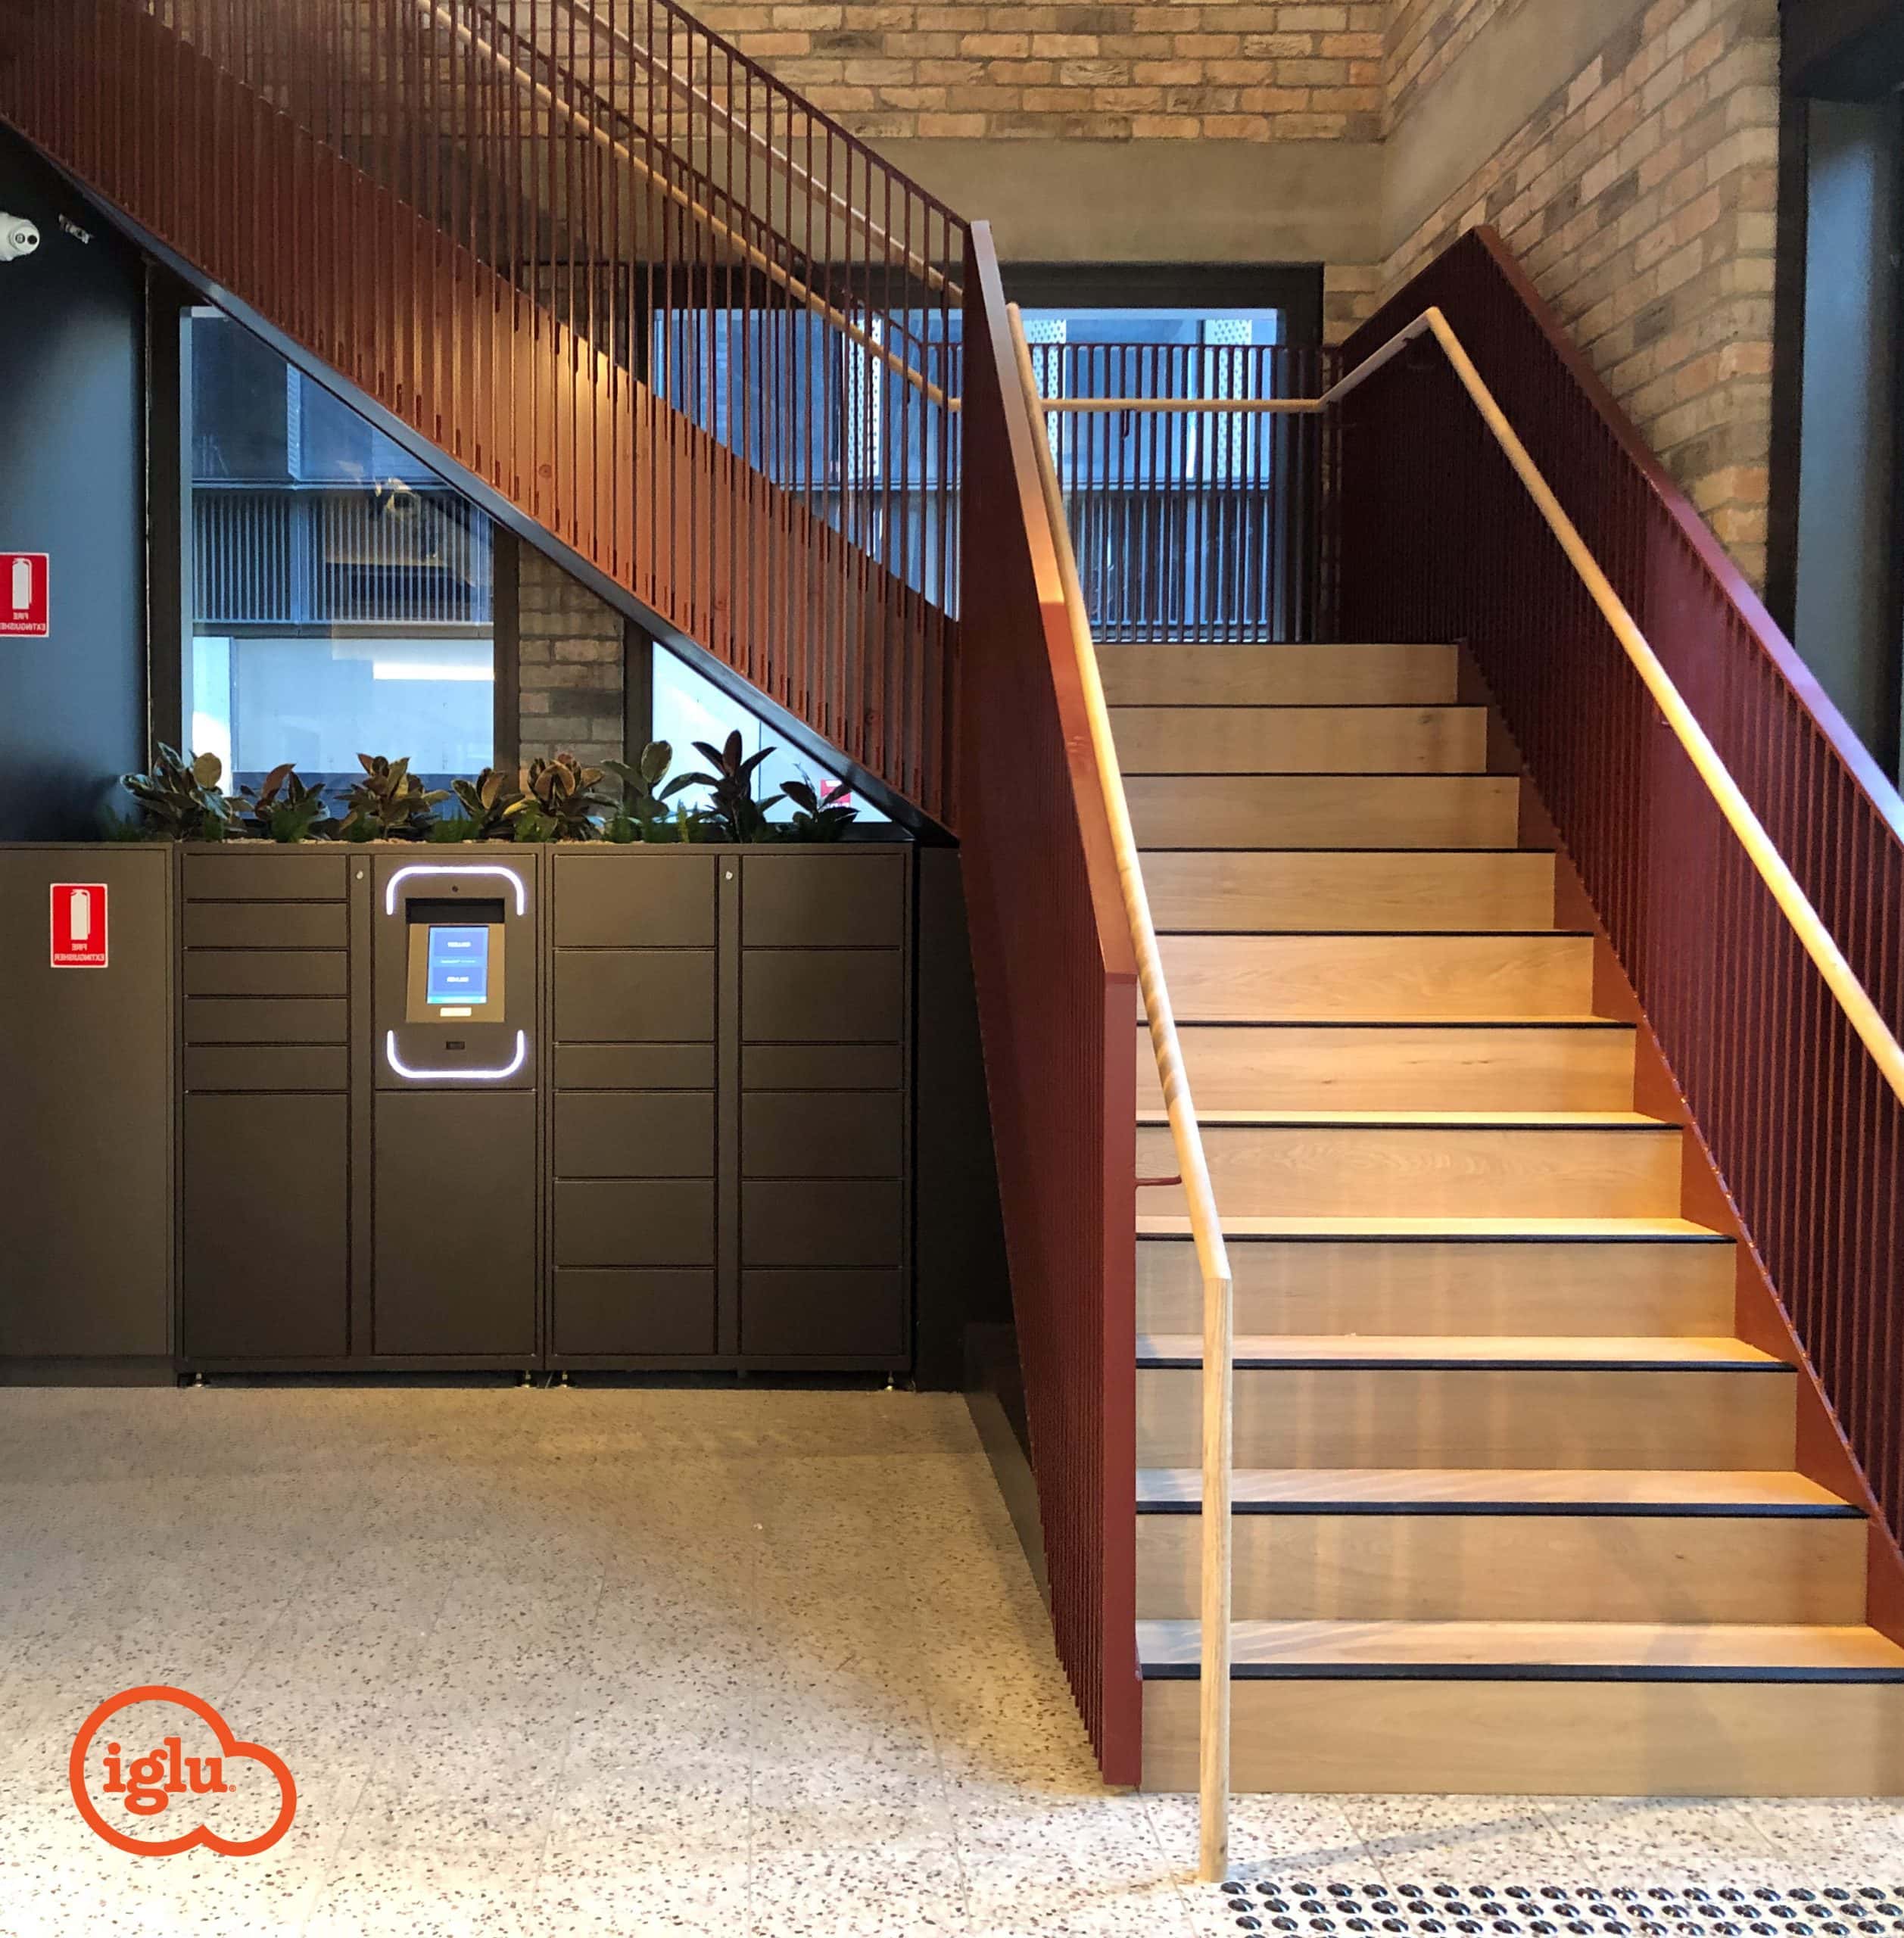 Interior of a modern building featuring a wooden staircase with red railings, parcel management lockers, and a recycling bin under the stairs.